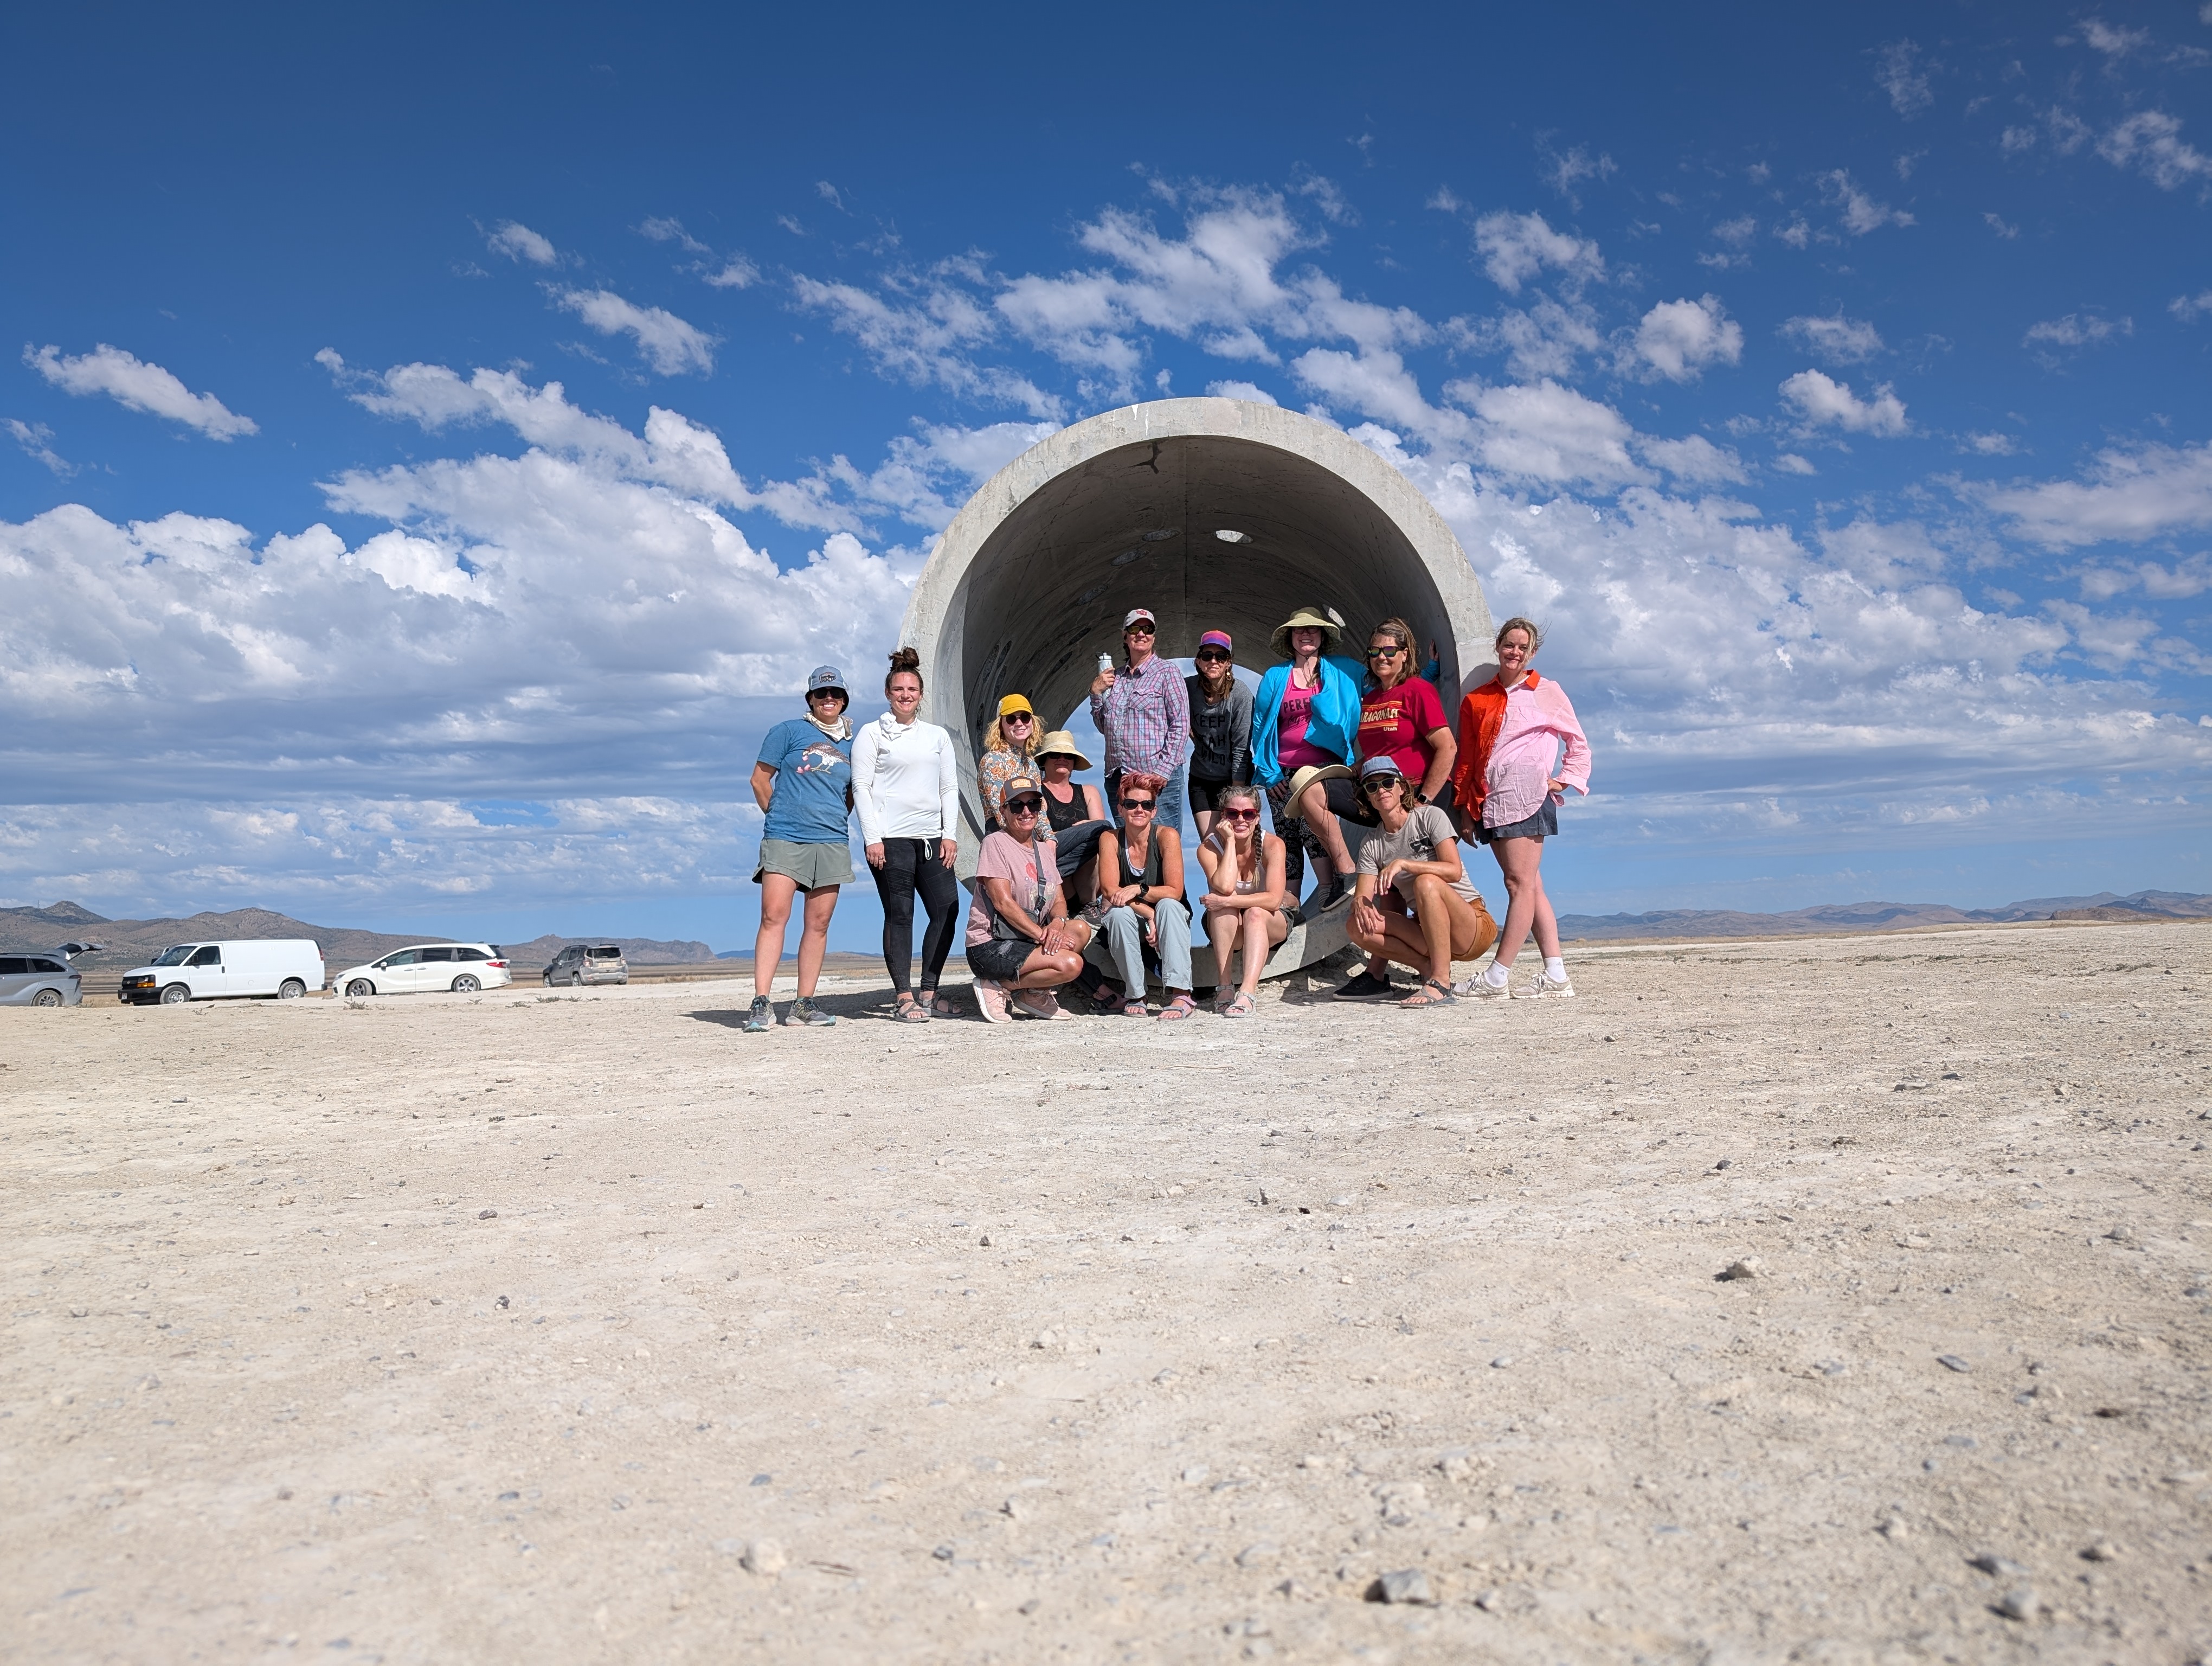 A group of people stand at the mouth of a large concrete tunnel.